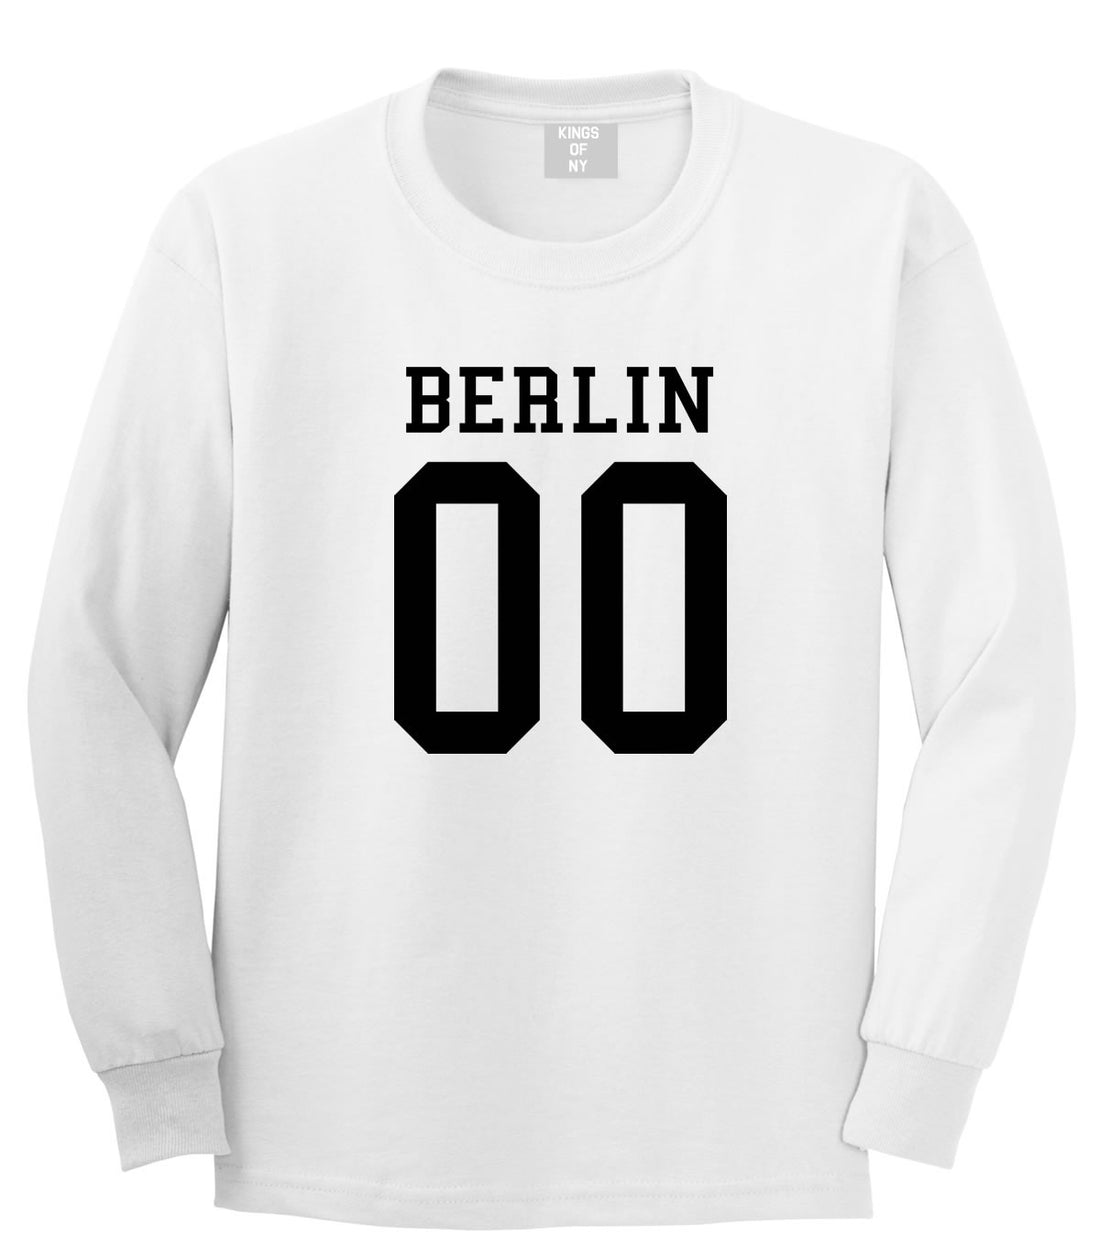 Berlin Team Jersey Germany Country Long Sleeve T-Shirt in White By Kings Of NY